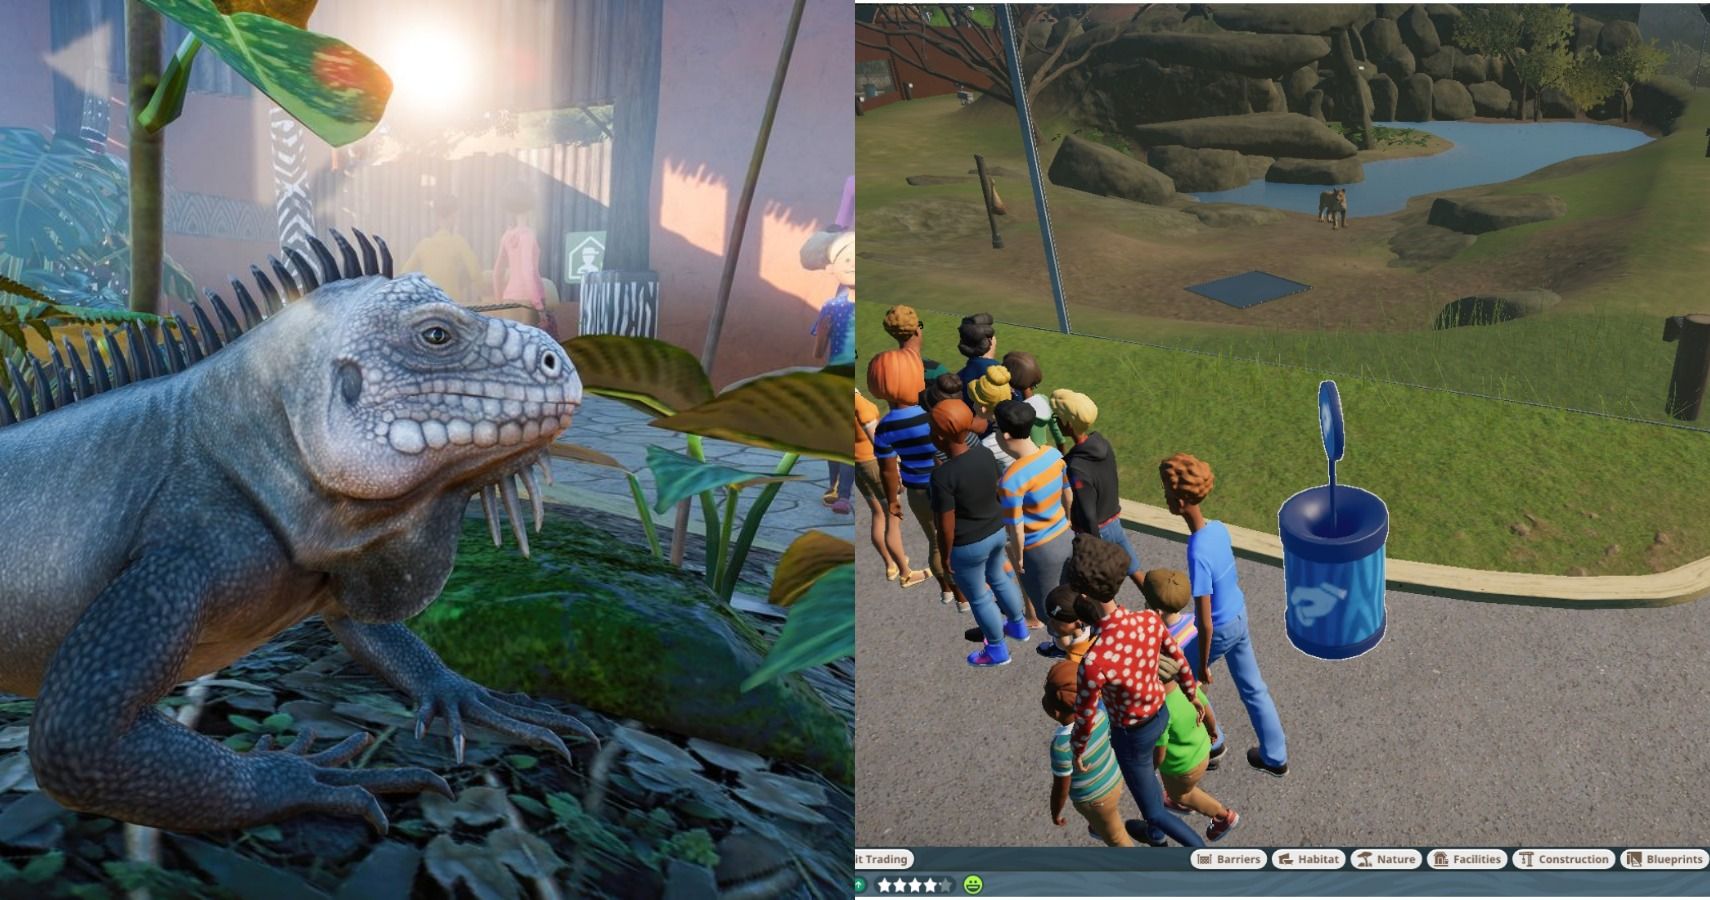 zoo tycoon ps4 release date